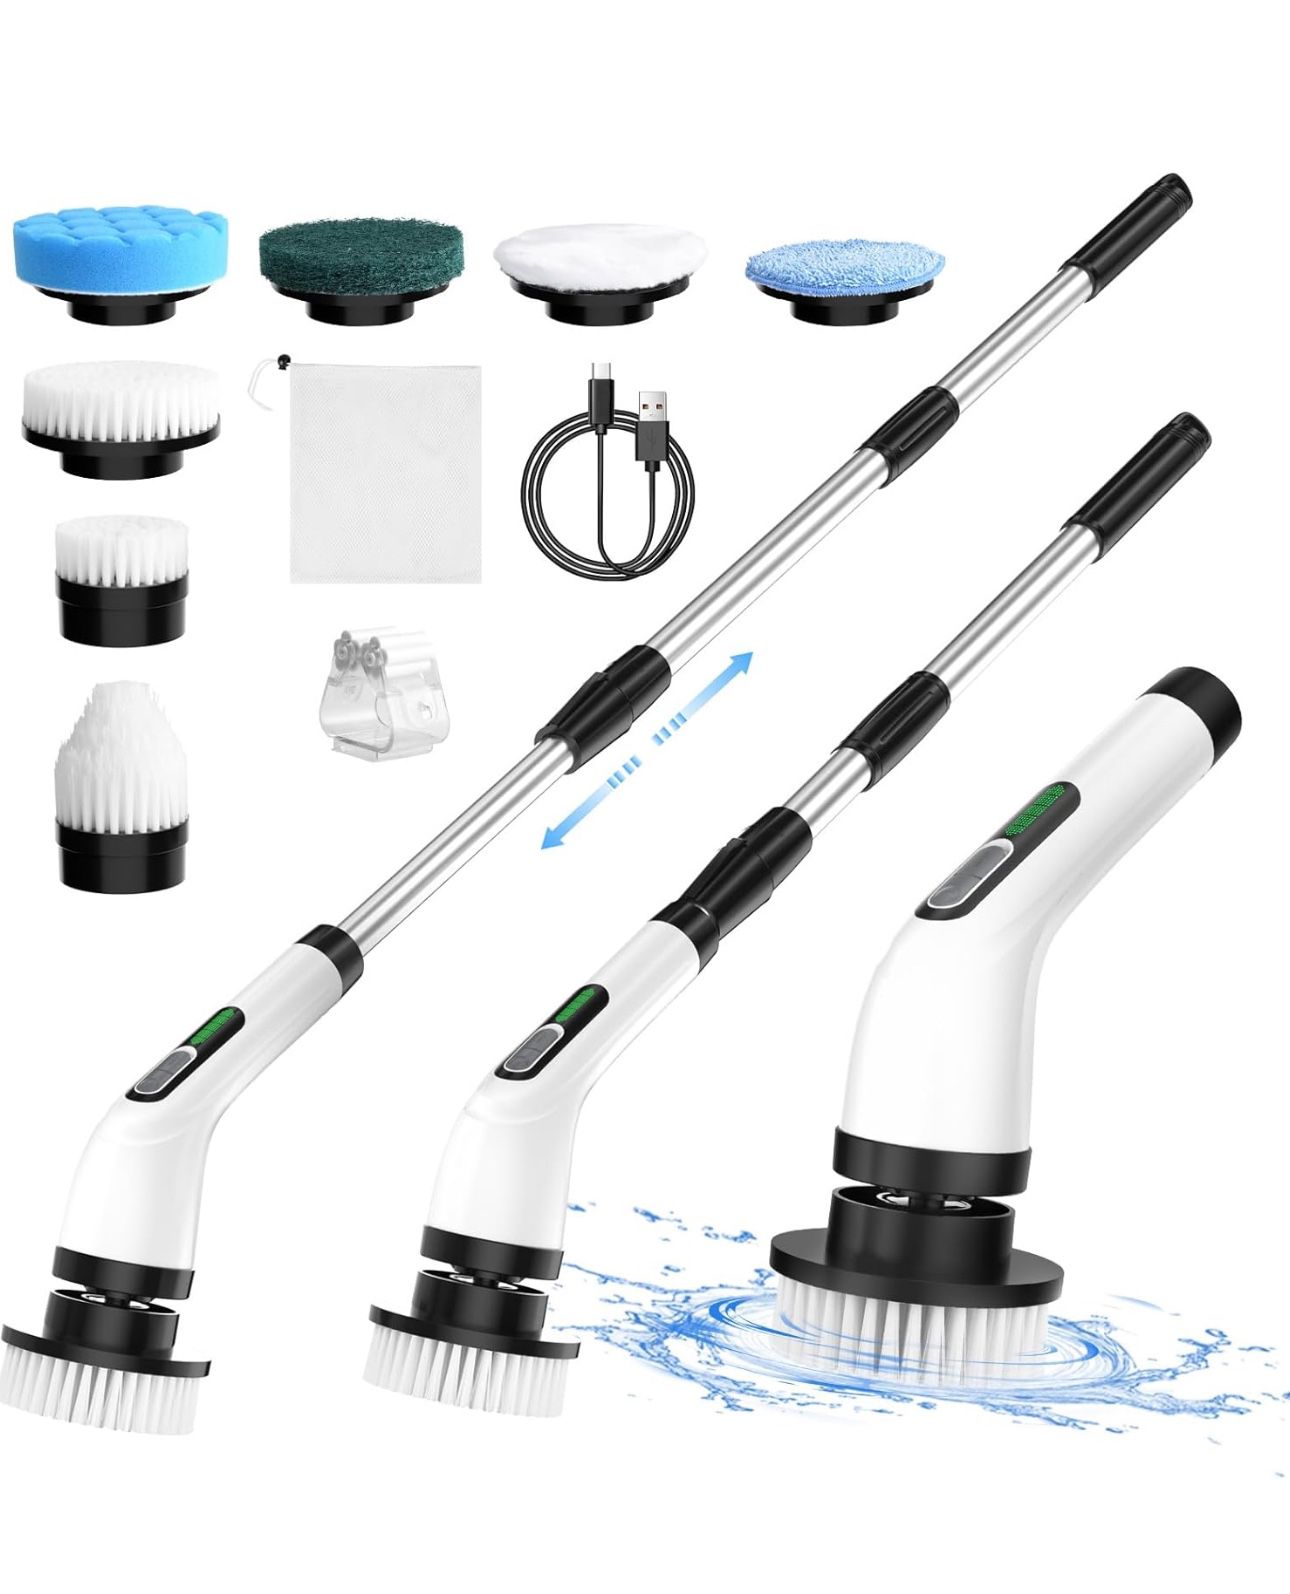 Electric Spin Scrubber, 2 Adjustable Speeds Cordless Electric Scrubber for Cleaning, Adjustable & Detachable Handle Shower Scrubber with 7 Replaceable